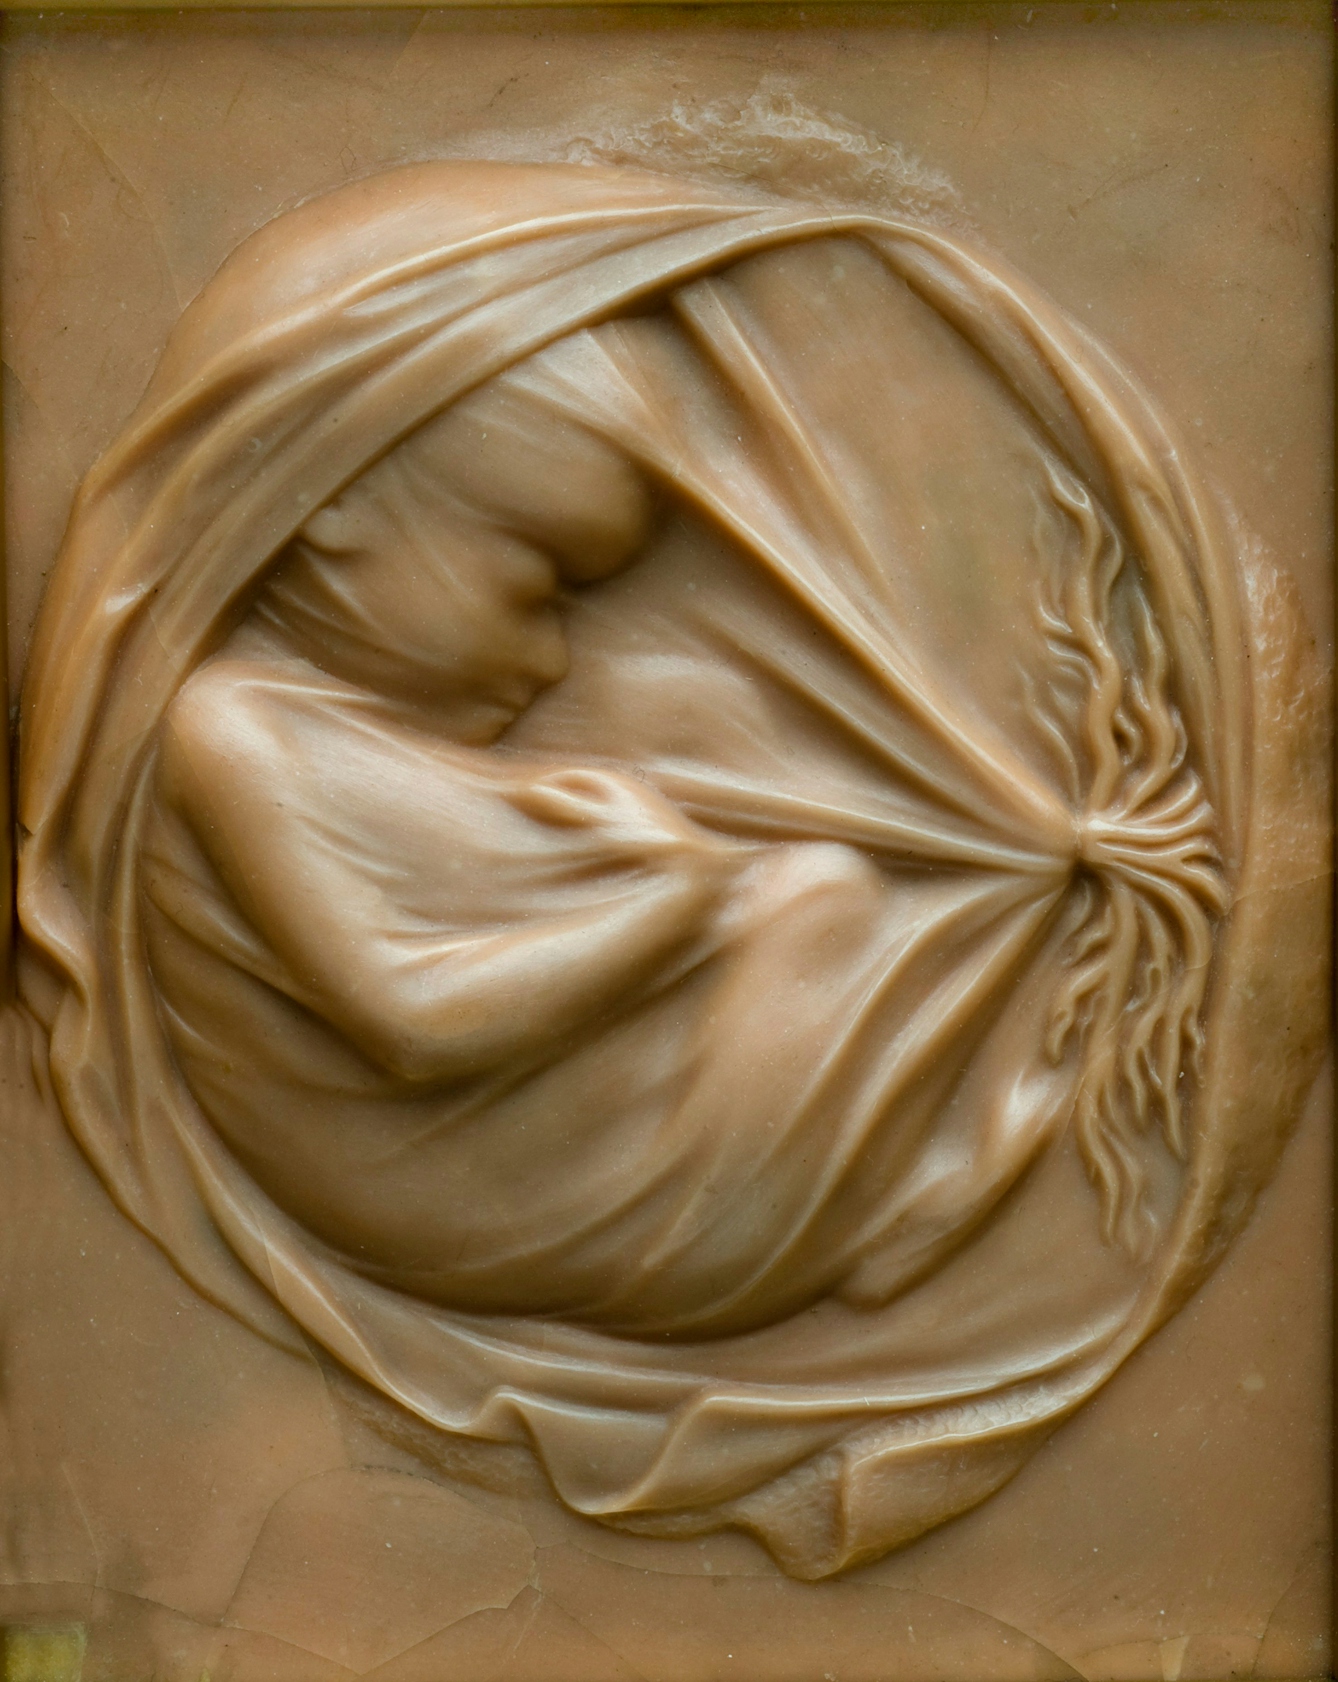 A photograph of a sculpture in wax. The small plaque illustrates a well developed foetus. Shrouded ghostlike within a membranous covering, it appears to be sleeping. 